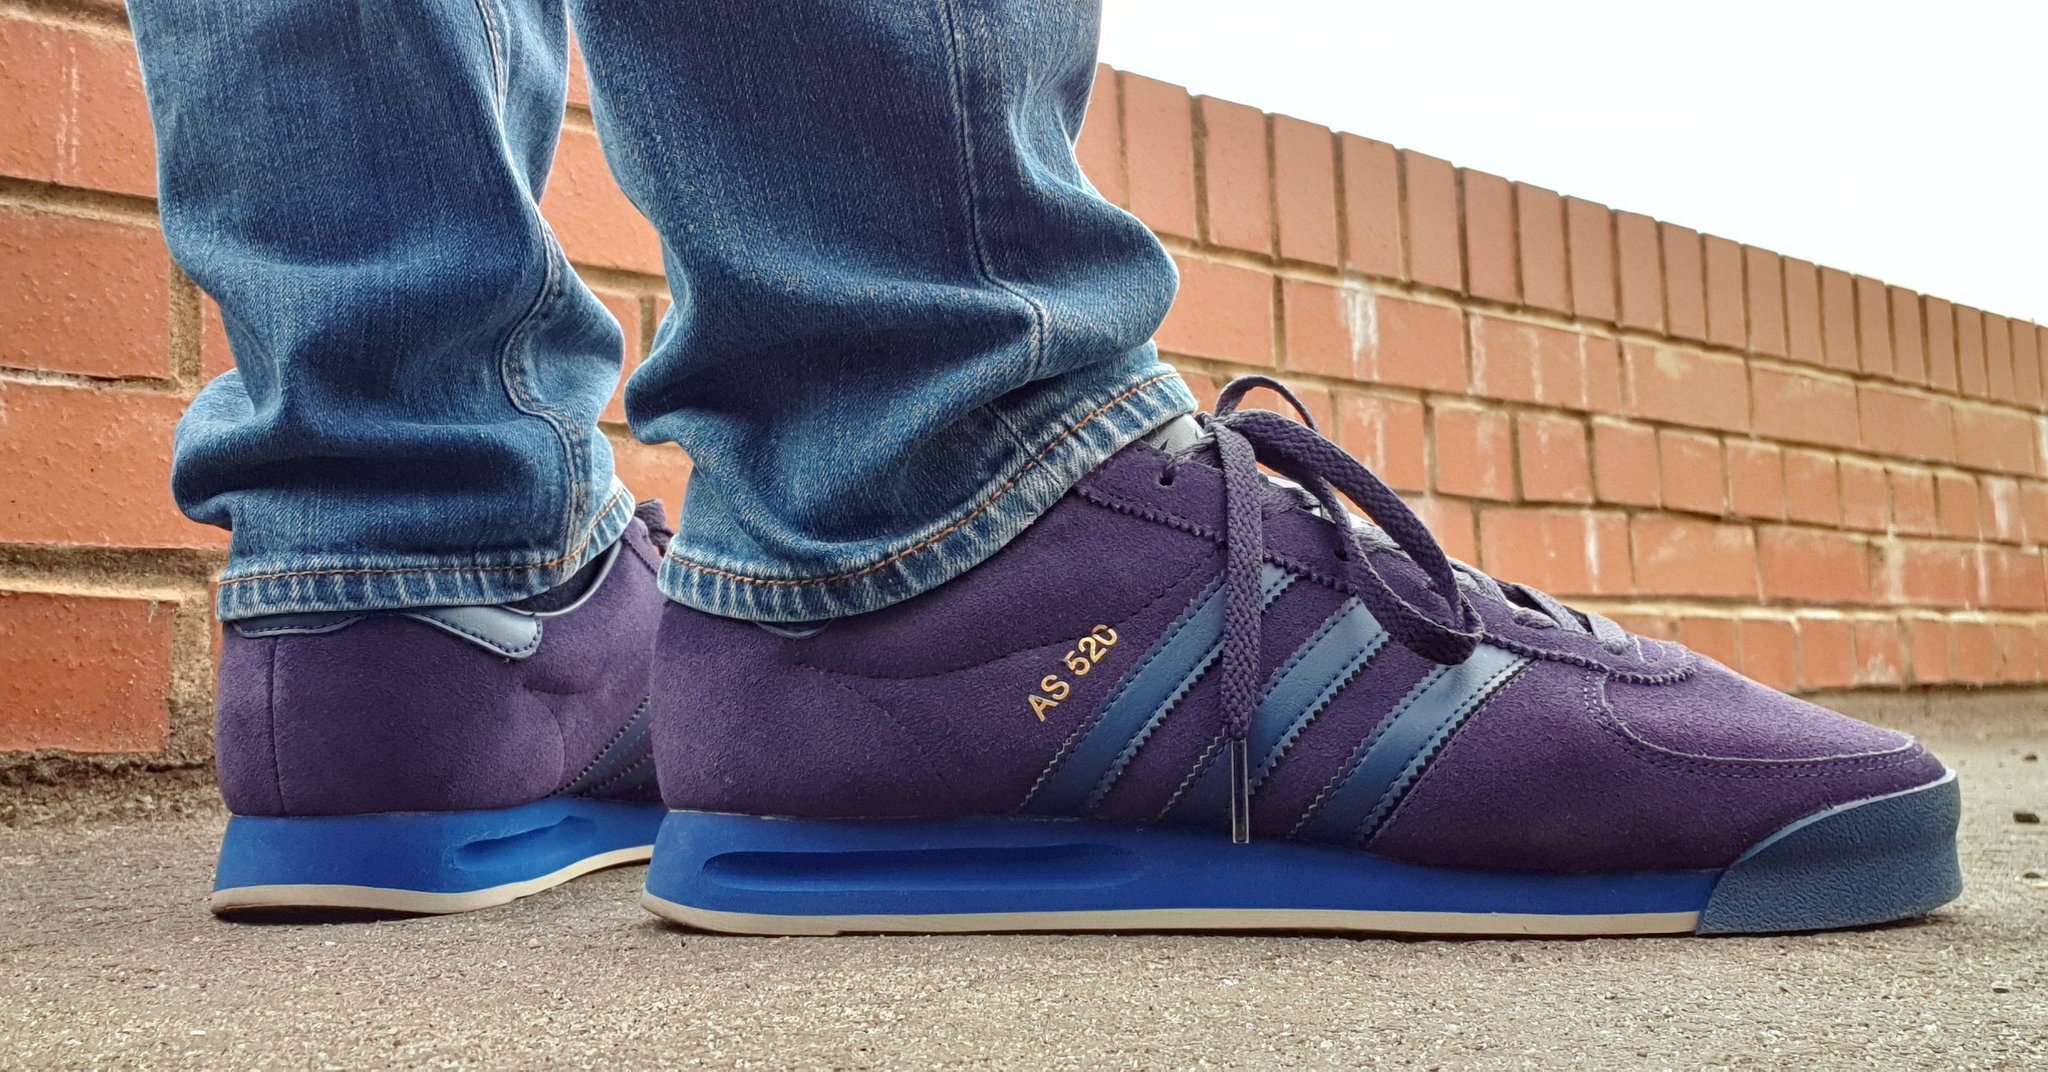 absceso obispo Con Dominic Powell /// on Twitter: "Adidas Spezial AS 520 SPZL  (SUPCOL/SUPCOL/SUPCOL) SPRING 2019 #Adidasspezial #spzl #adidascollector  https://t.co/nFAss2JCHs" / Twitter